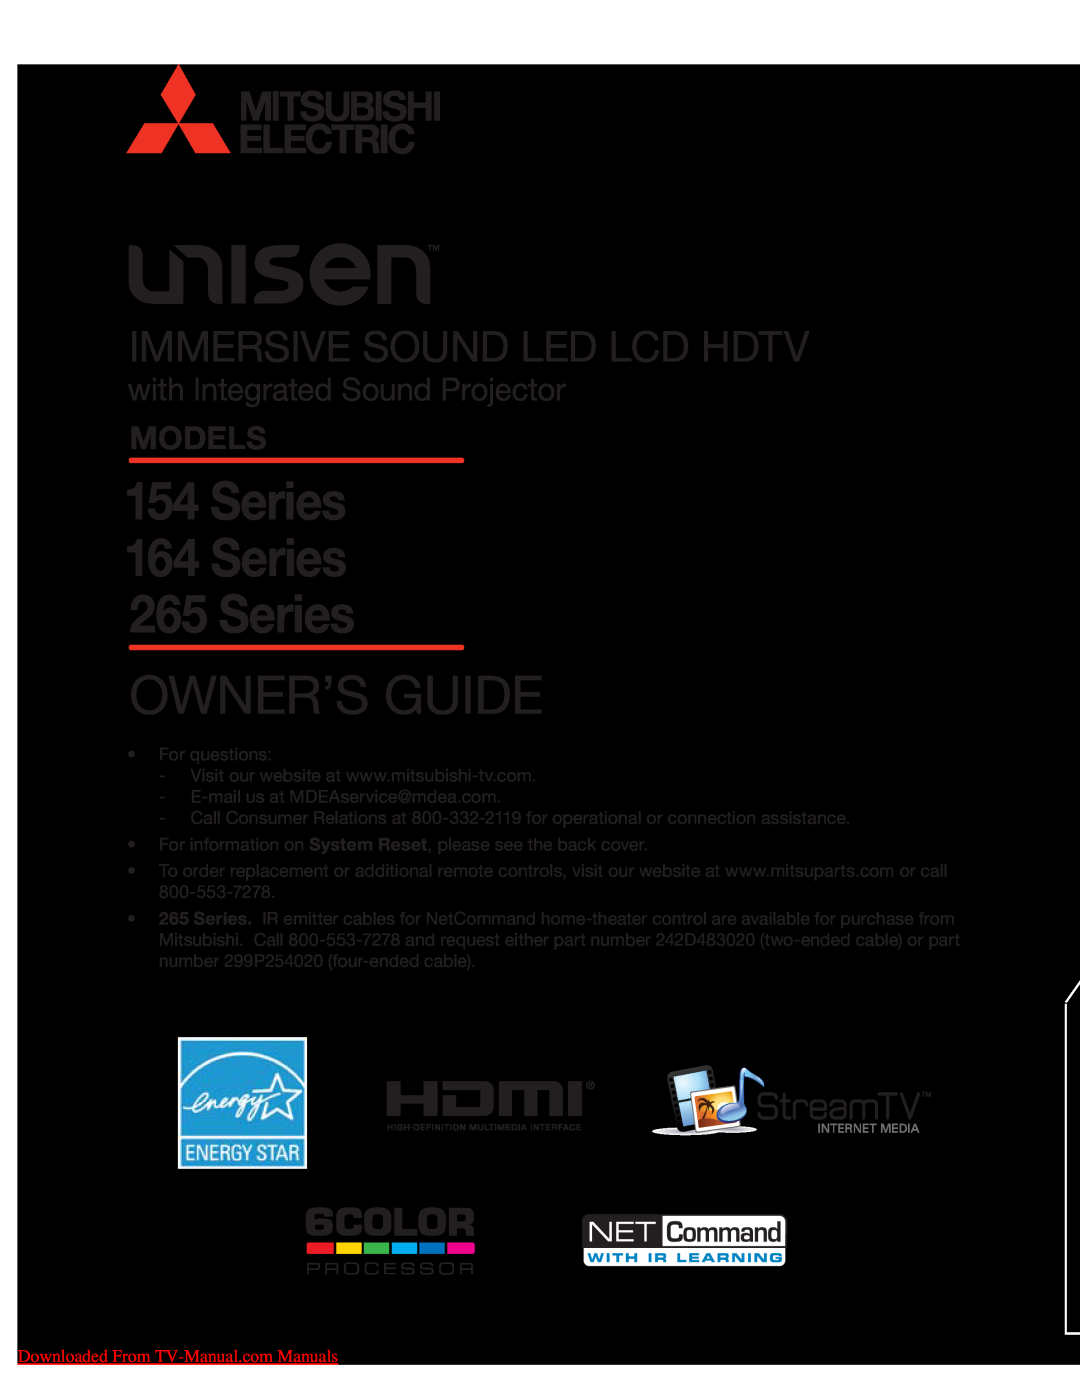 Unisen 154 Series manual Models, Downloaded From TV-Manual.com Manuals, Series 164 Series 265 Series, Owner’S Guide 